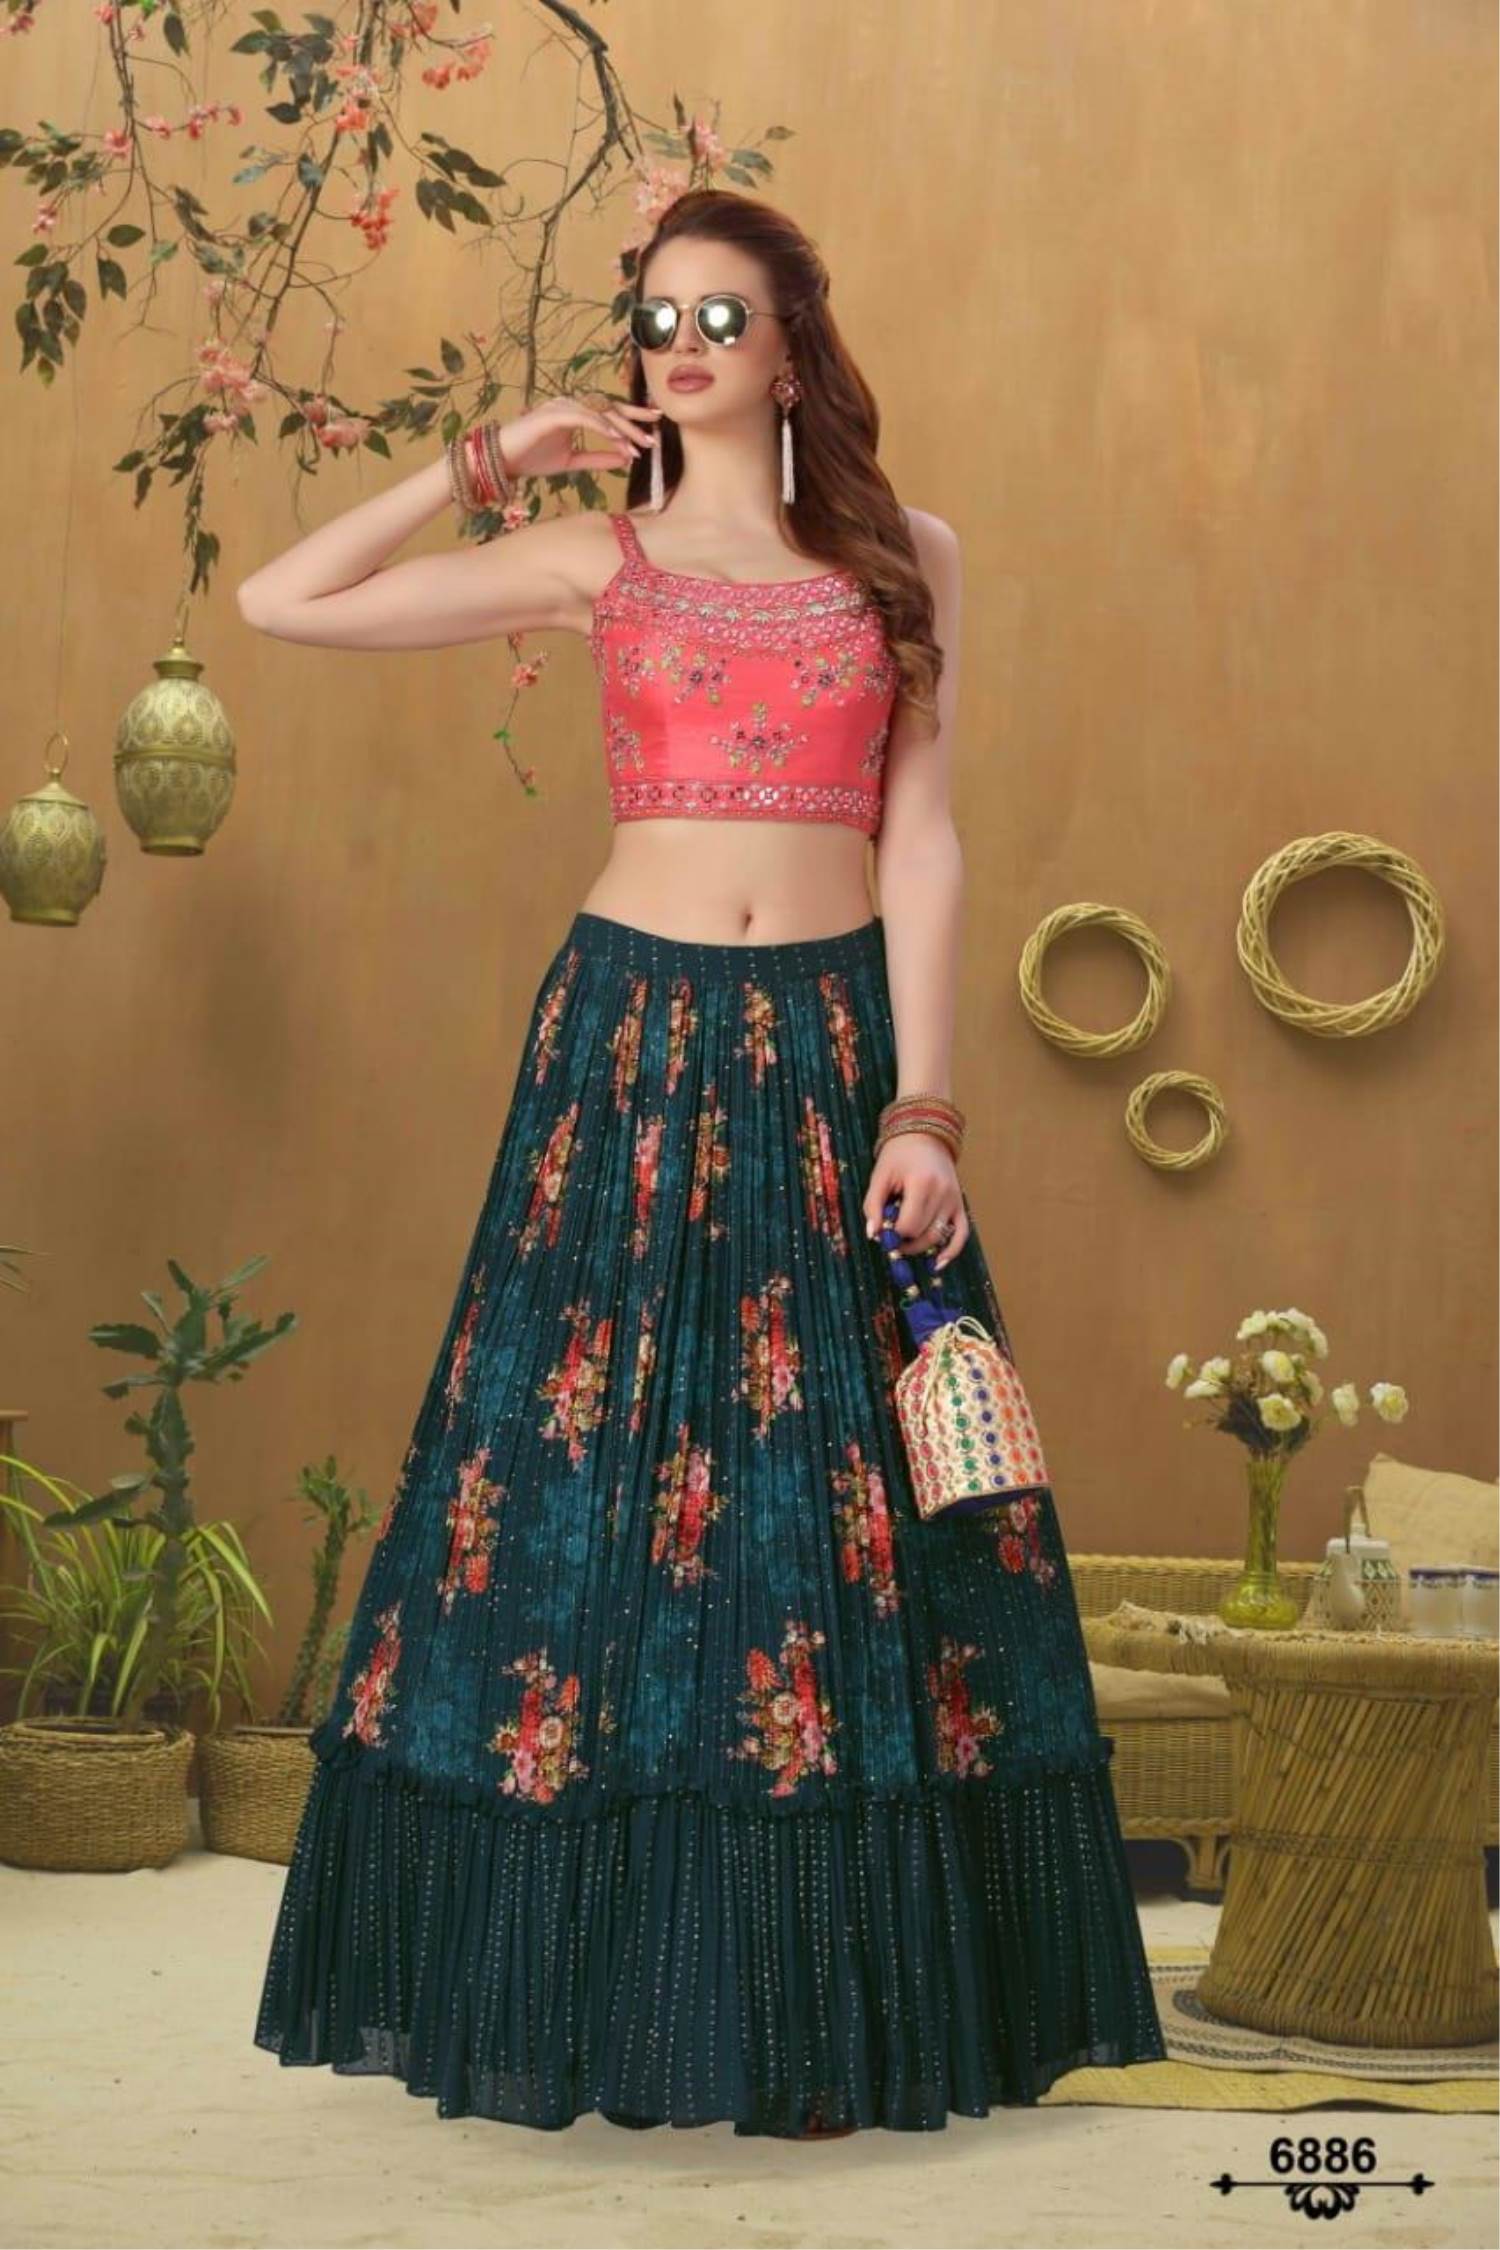 LINDA BLUSH PINK AND PEACH LEHENGA WITH A BLOUSE AND DUPATTA